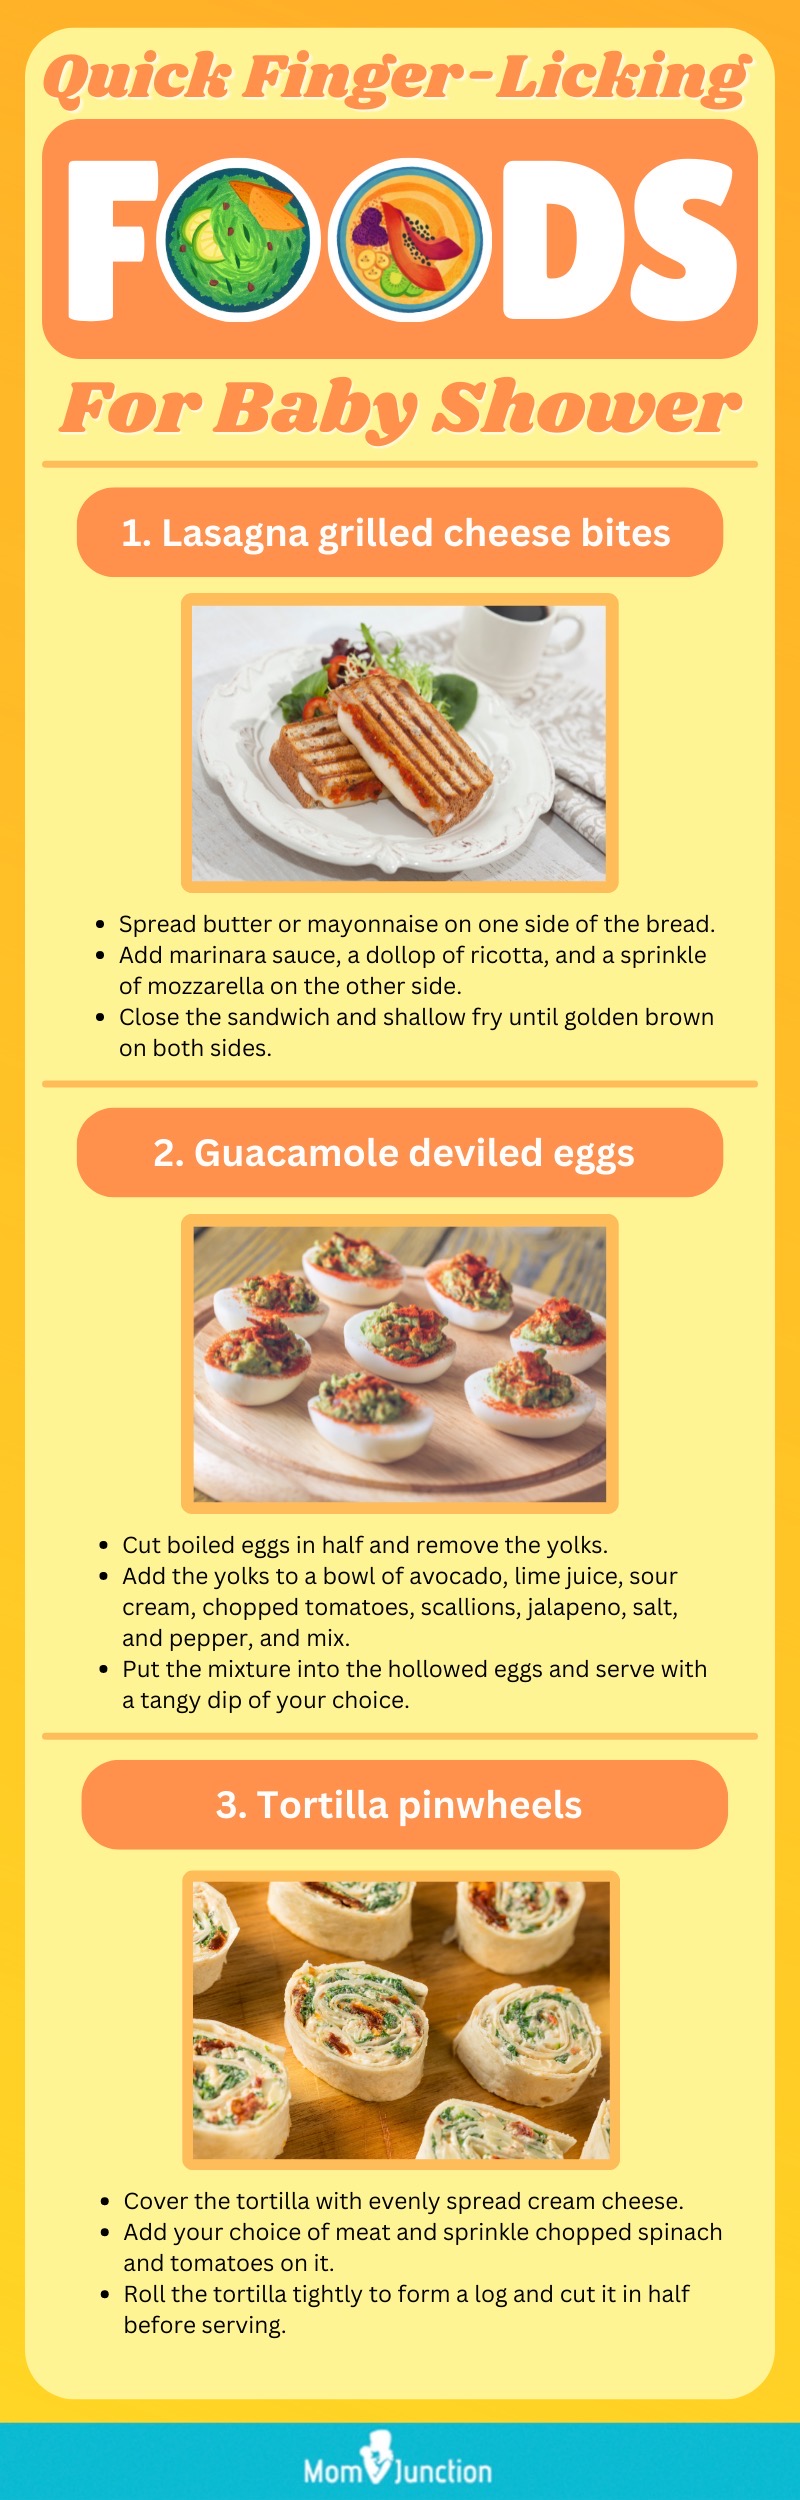 https://www.momjunction.com/wp-content/uploads/2019/07/easy-and-budget-friendly-baby-shower-food-recipes-infographic.jpeg